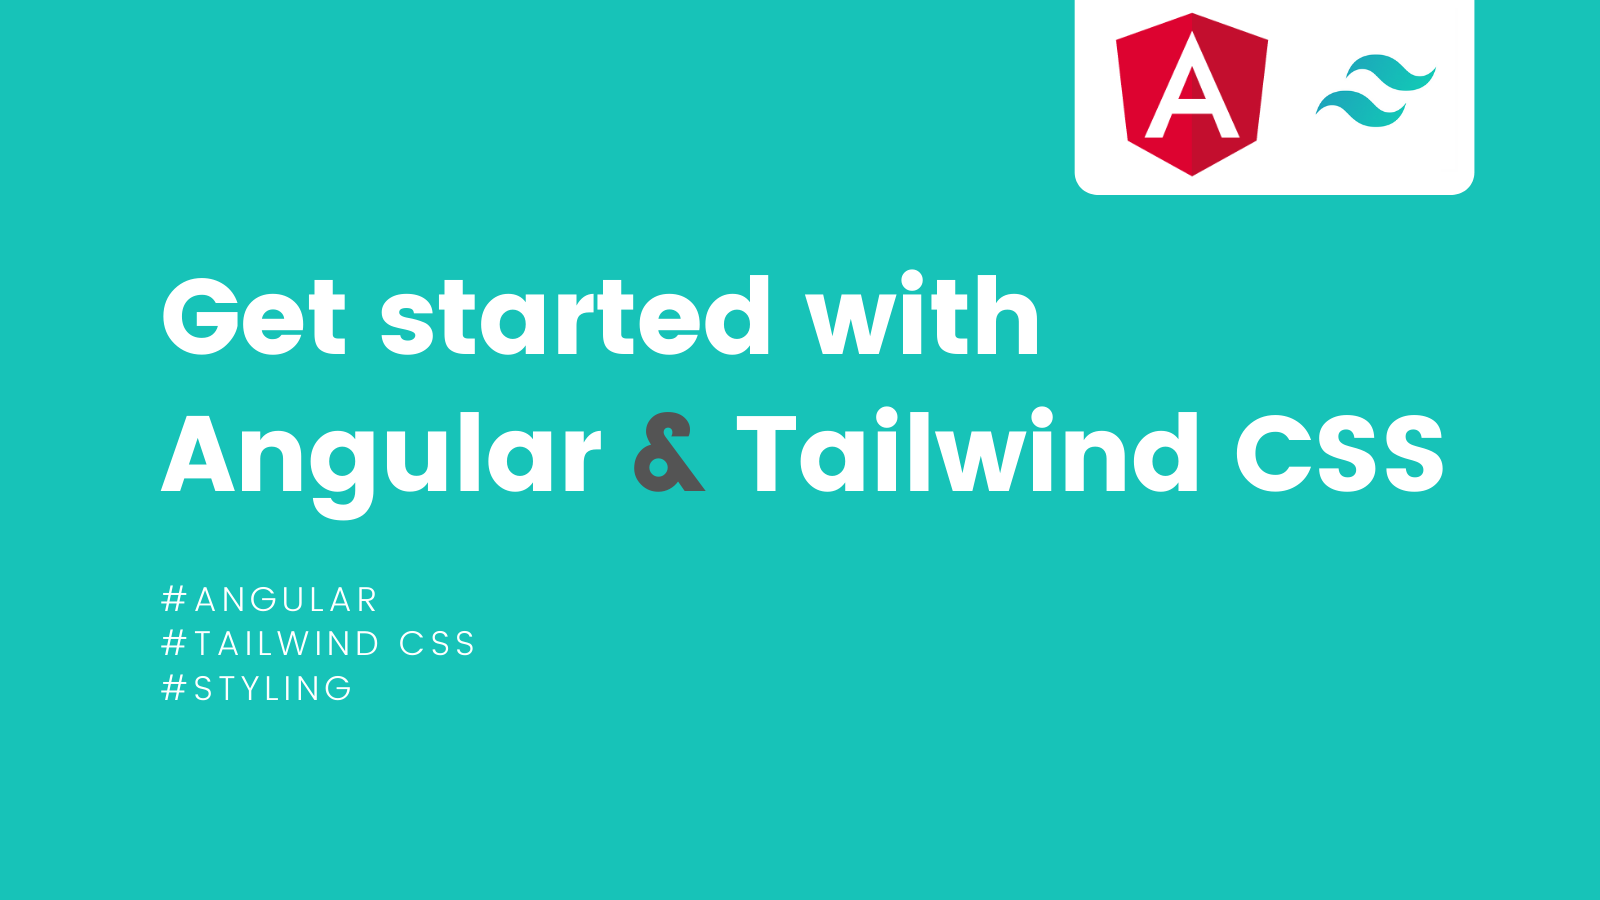 Get started with Angular & Tailwind CSS